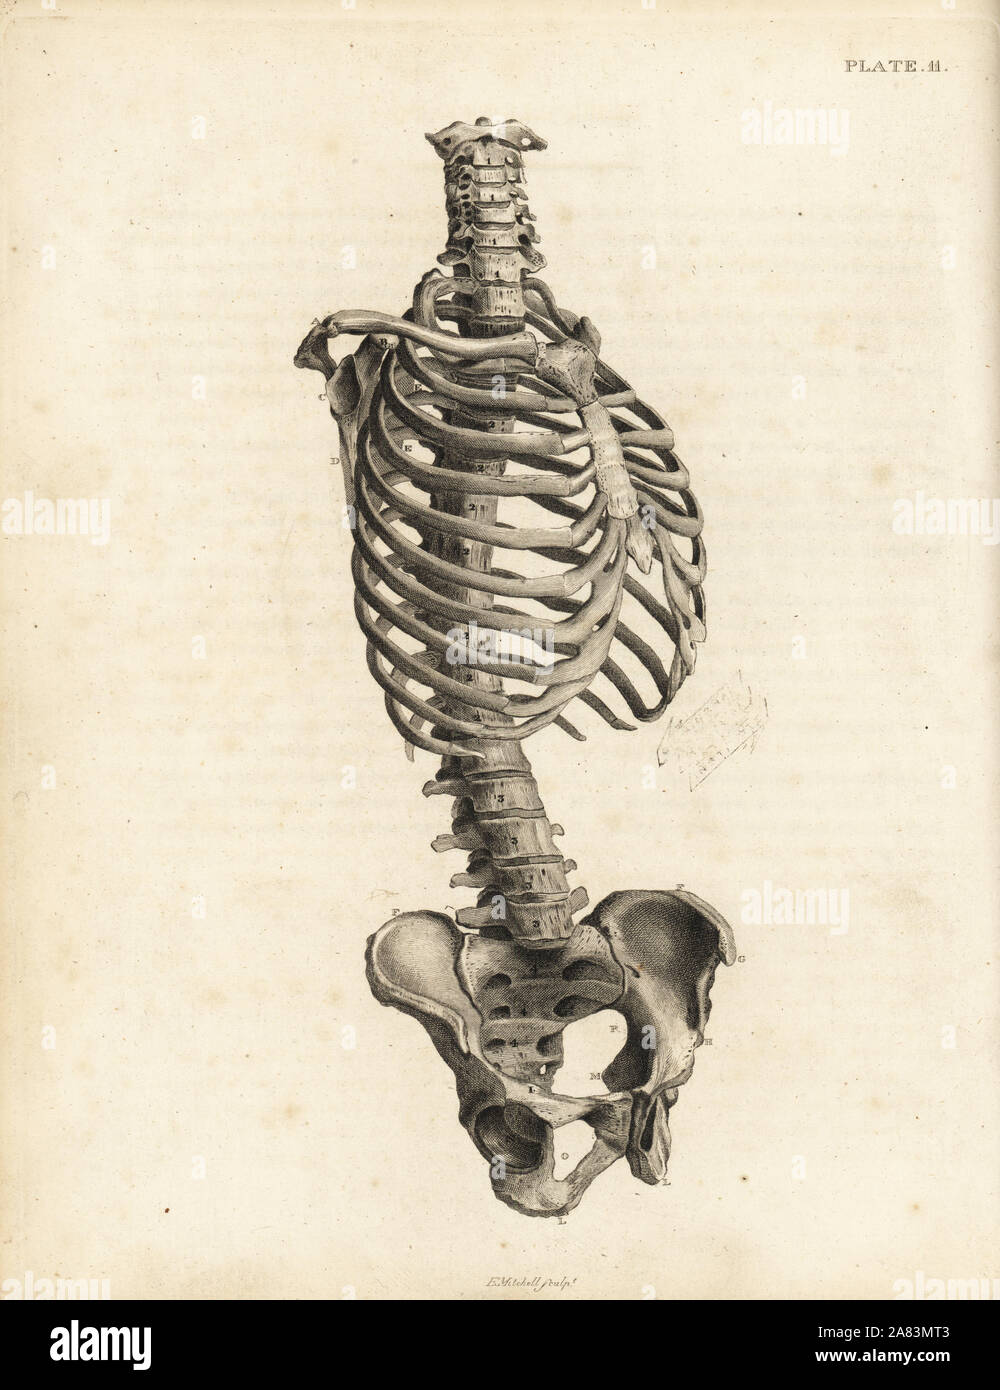 Front view of the human trunk skeleton including spine, ribs and pelvis. Copperplate engraving by Edward Mitchell after an anatomical illustration by Jean-Joseph Suefrom John Barclay's A Series of Engravings of the Human Skeleton, MacLachlan and Stewart, Edinburgh, 1824. Stock Photo